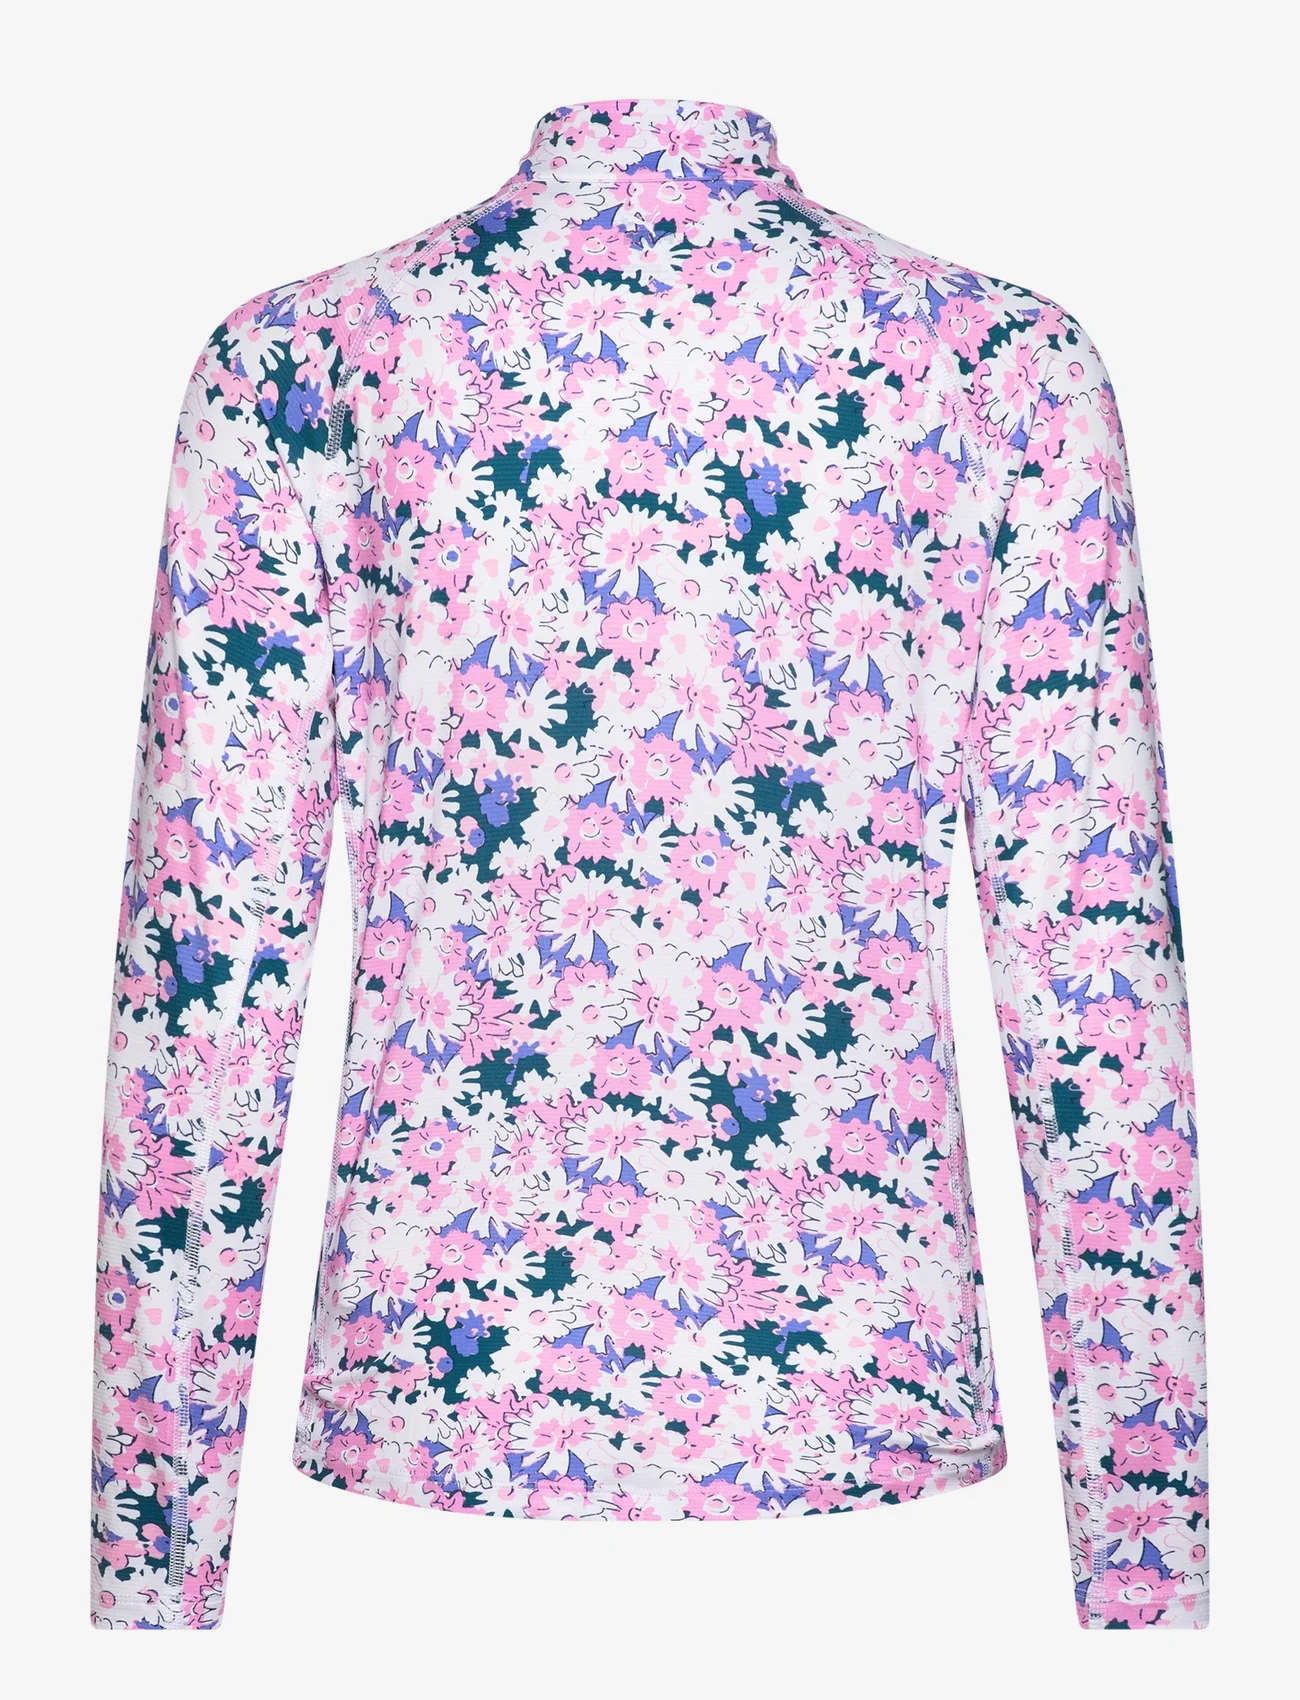 PUMA Golf - W You-V Bloom 1/4 Zip - mid layer jackets - pink icing-white glow - 1